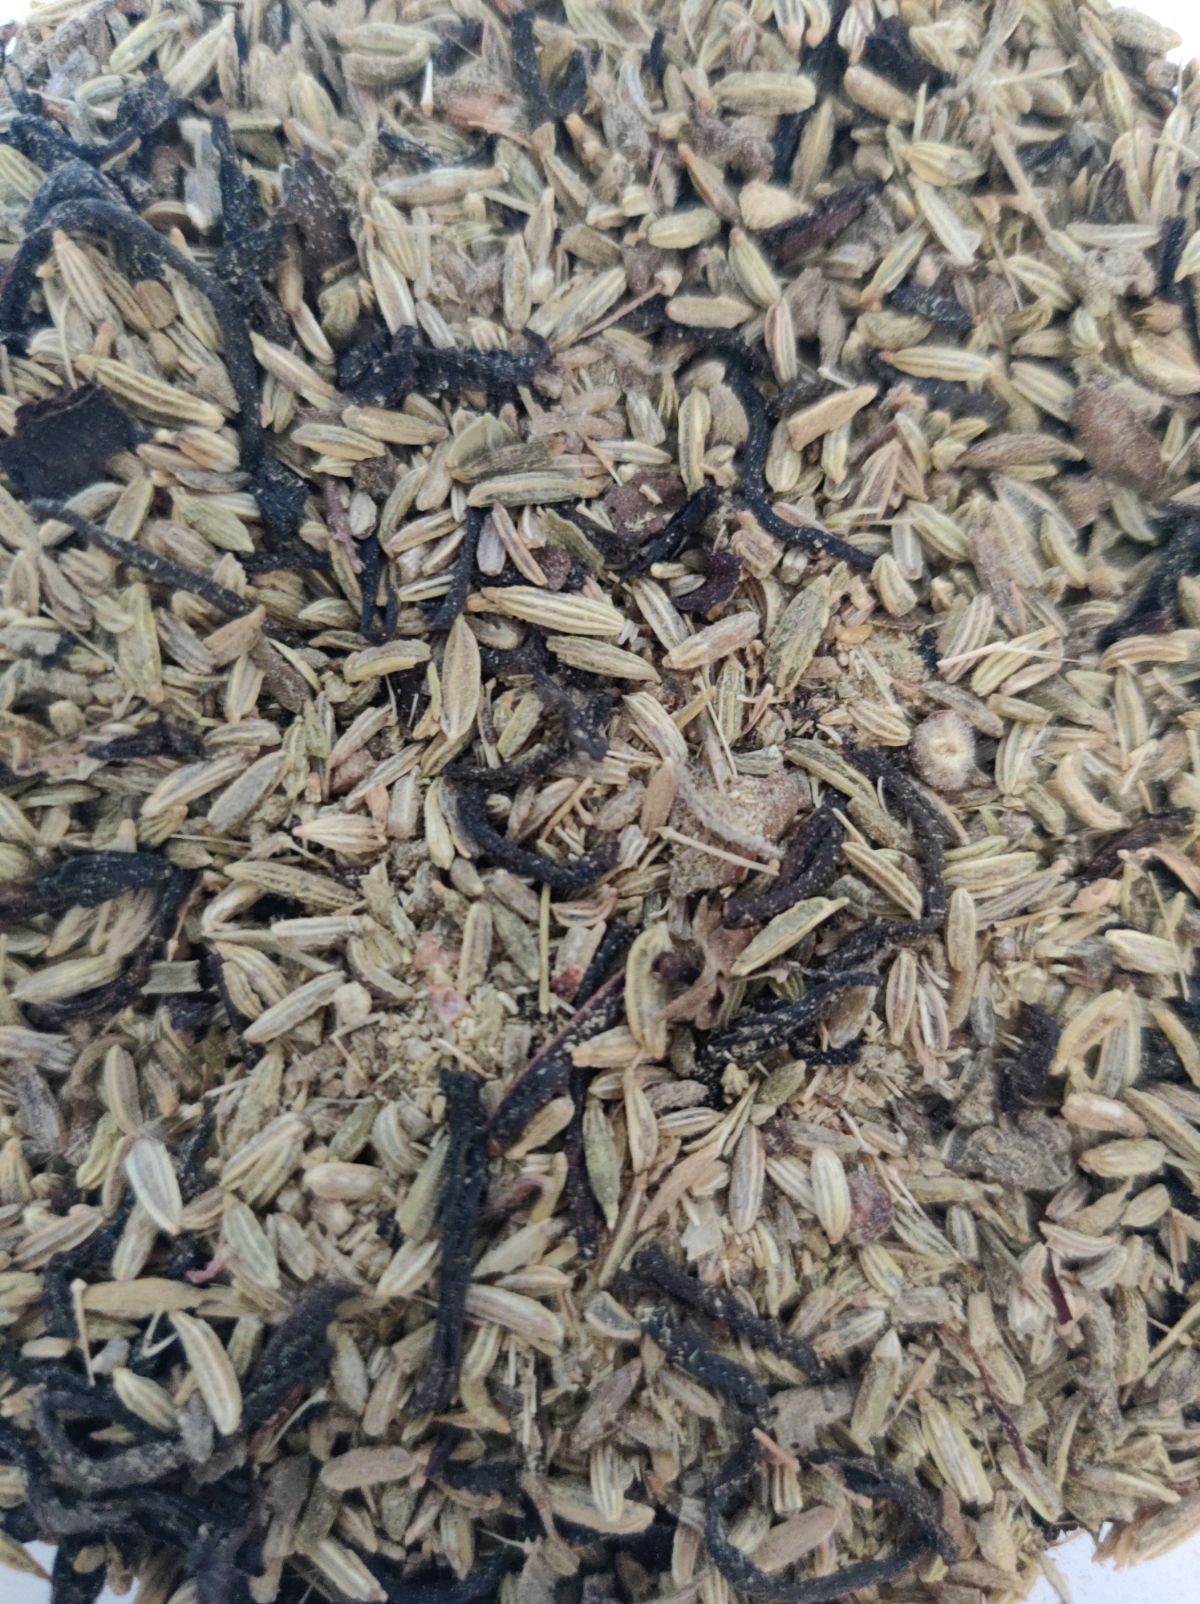 Yaza Fennel Green Tea -The Digestion Don and Immunity Booster - hfnl!fe